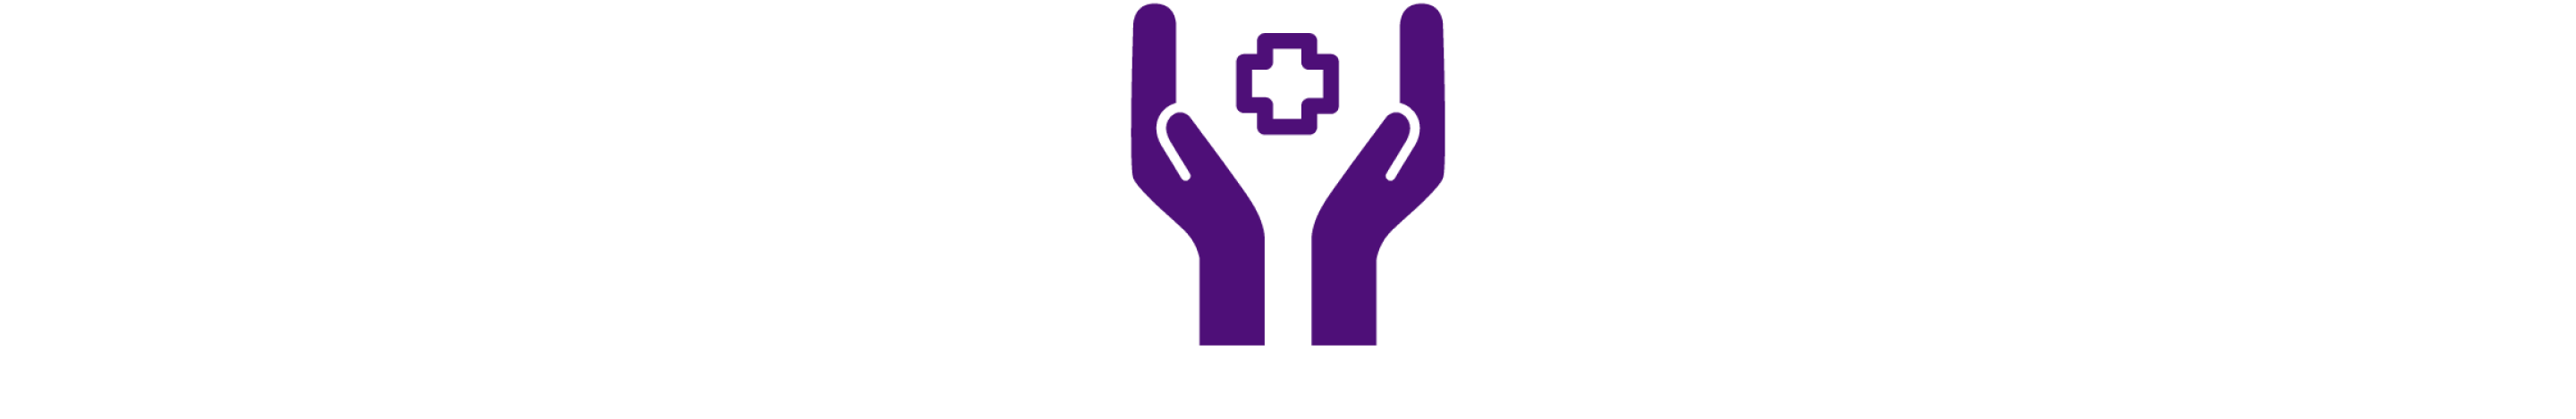 Dark purple icon of open hands with a medical logo between the palms.